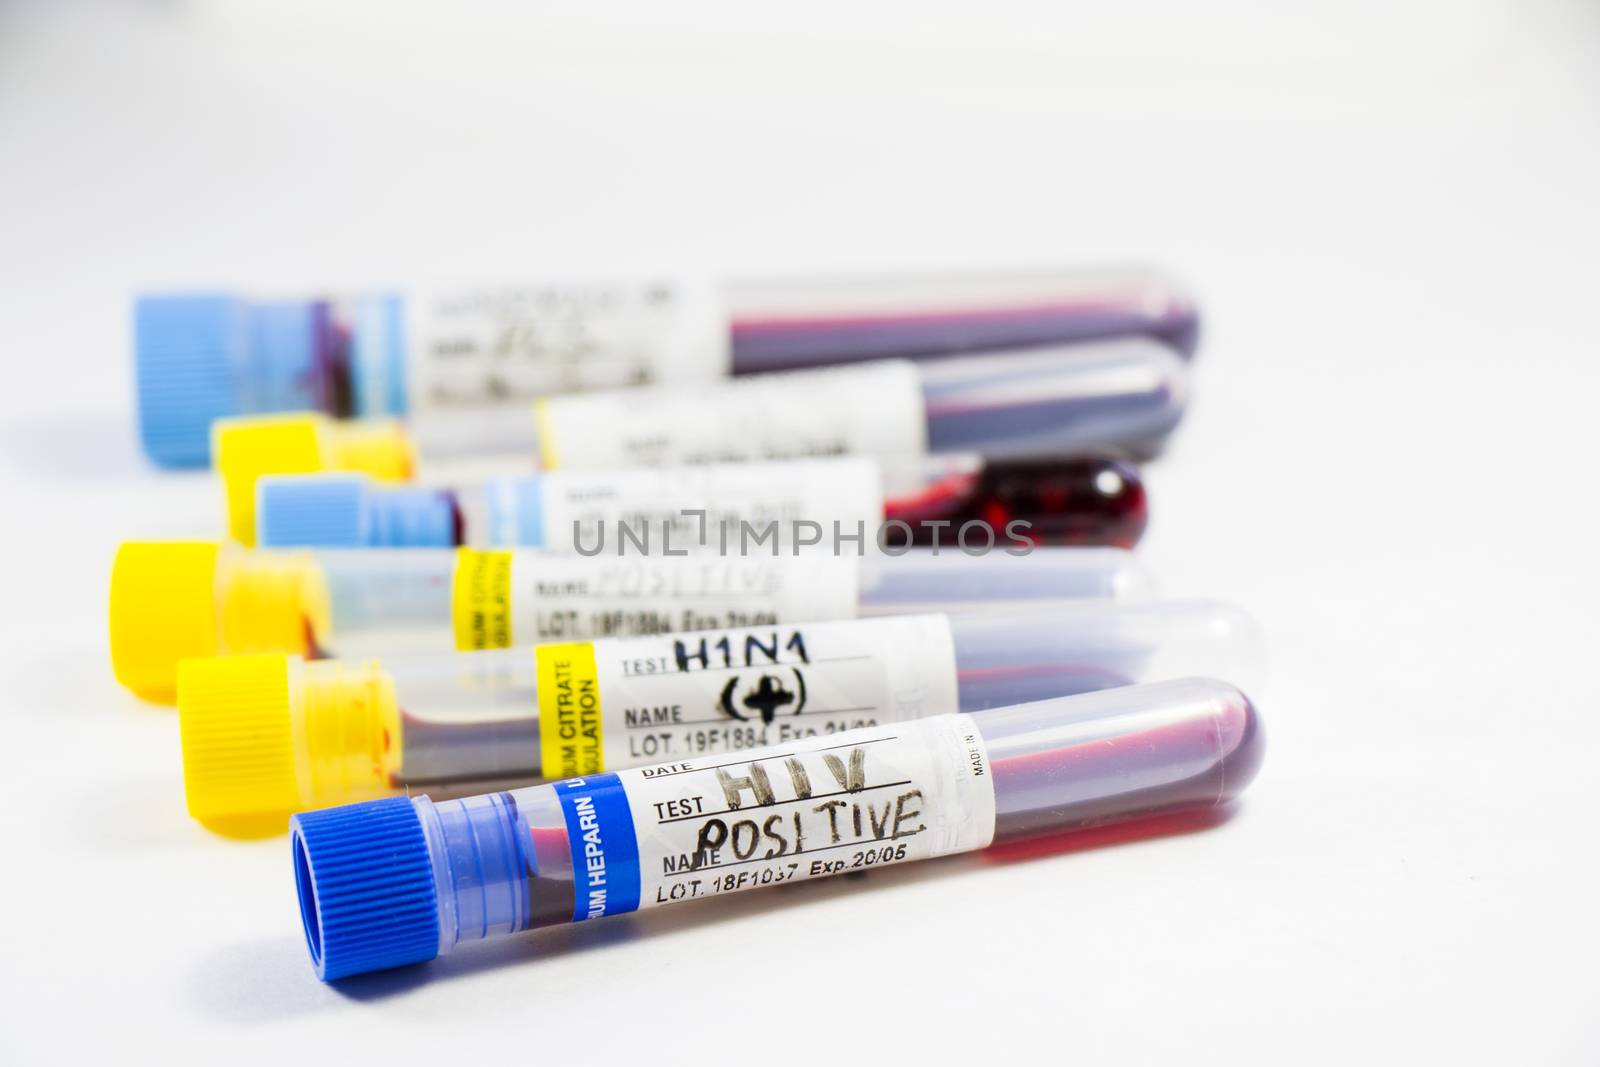 H1N1, Covid-19, Hepatitis C, Tuberculosis and Staphylococcus viruses blood tests in the tubes, laboratory diagnostics by Taidundua